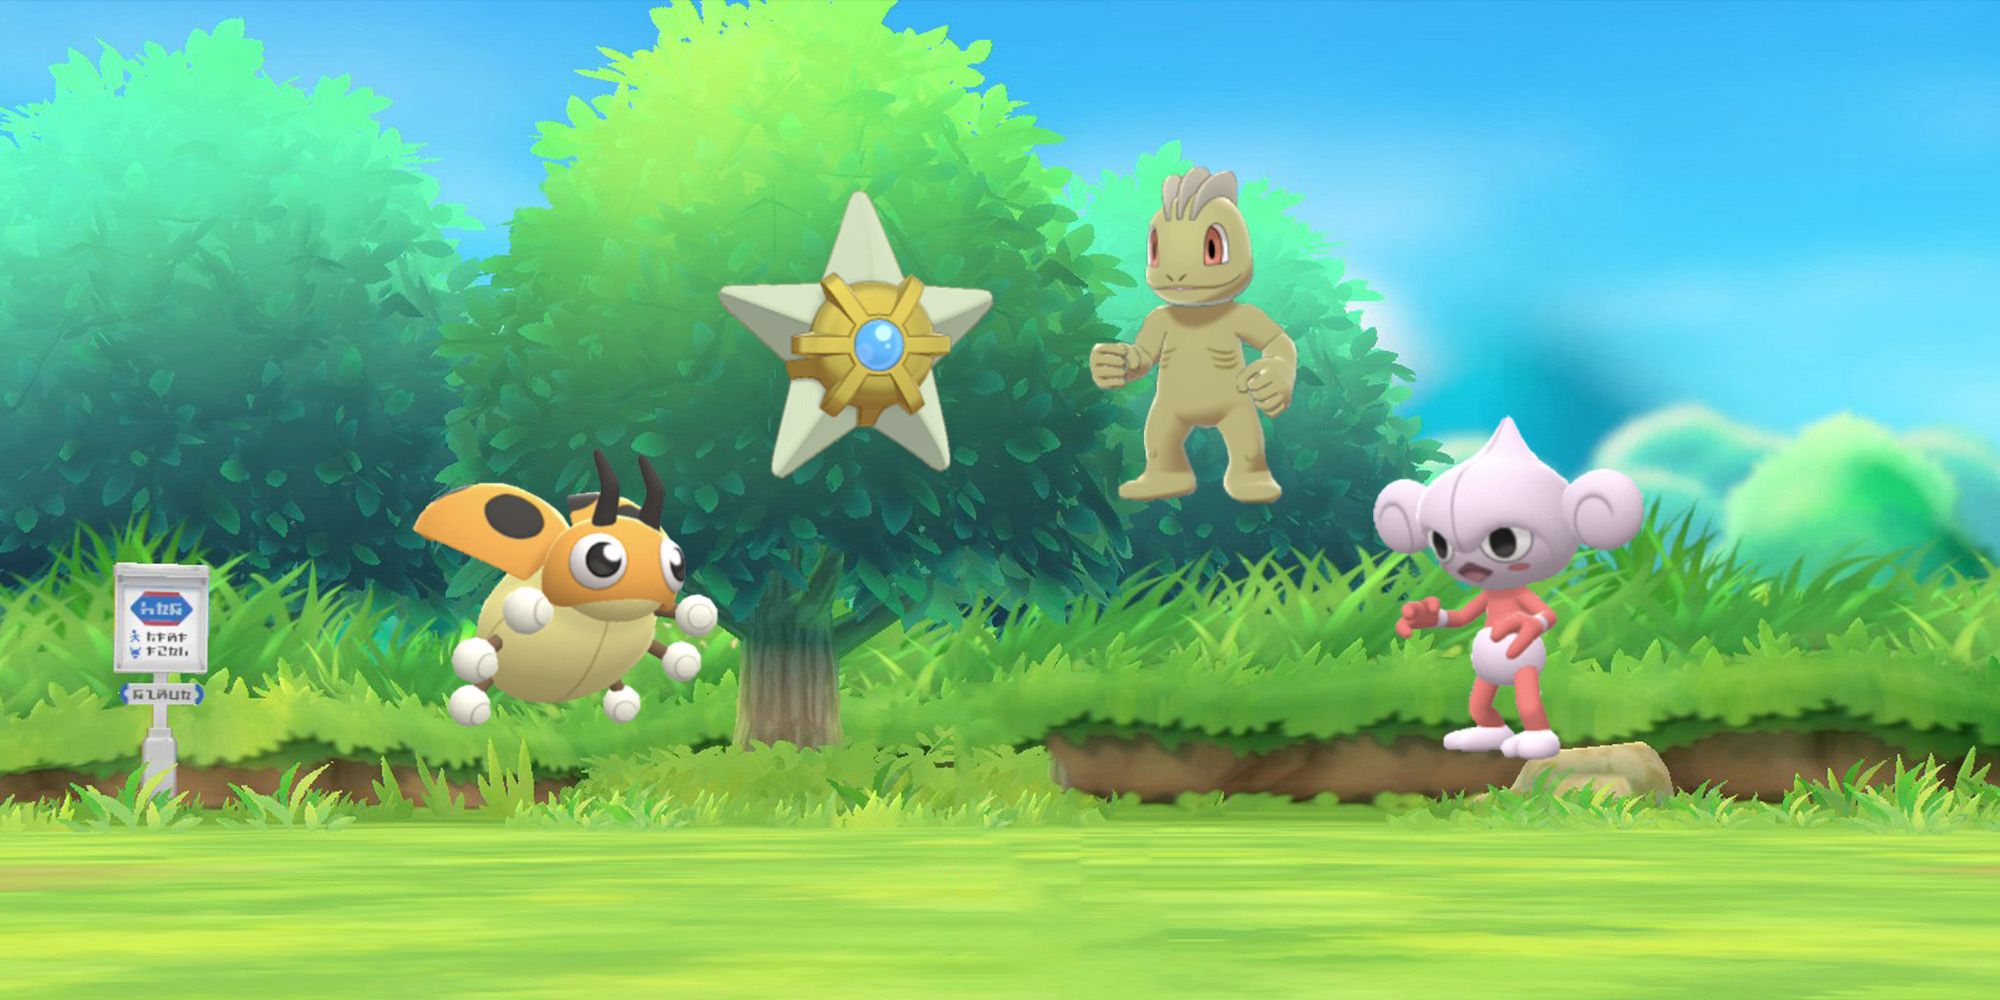 Can Eevee be shiny in Pokemon GO Spotlight Hour on March 7?